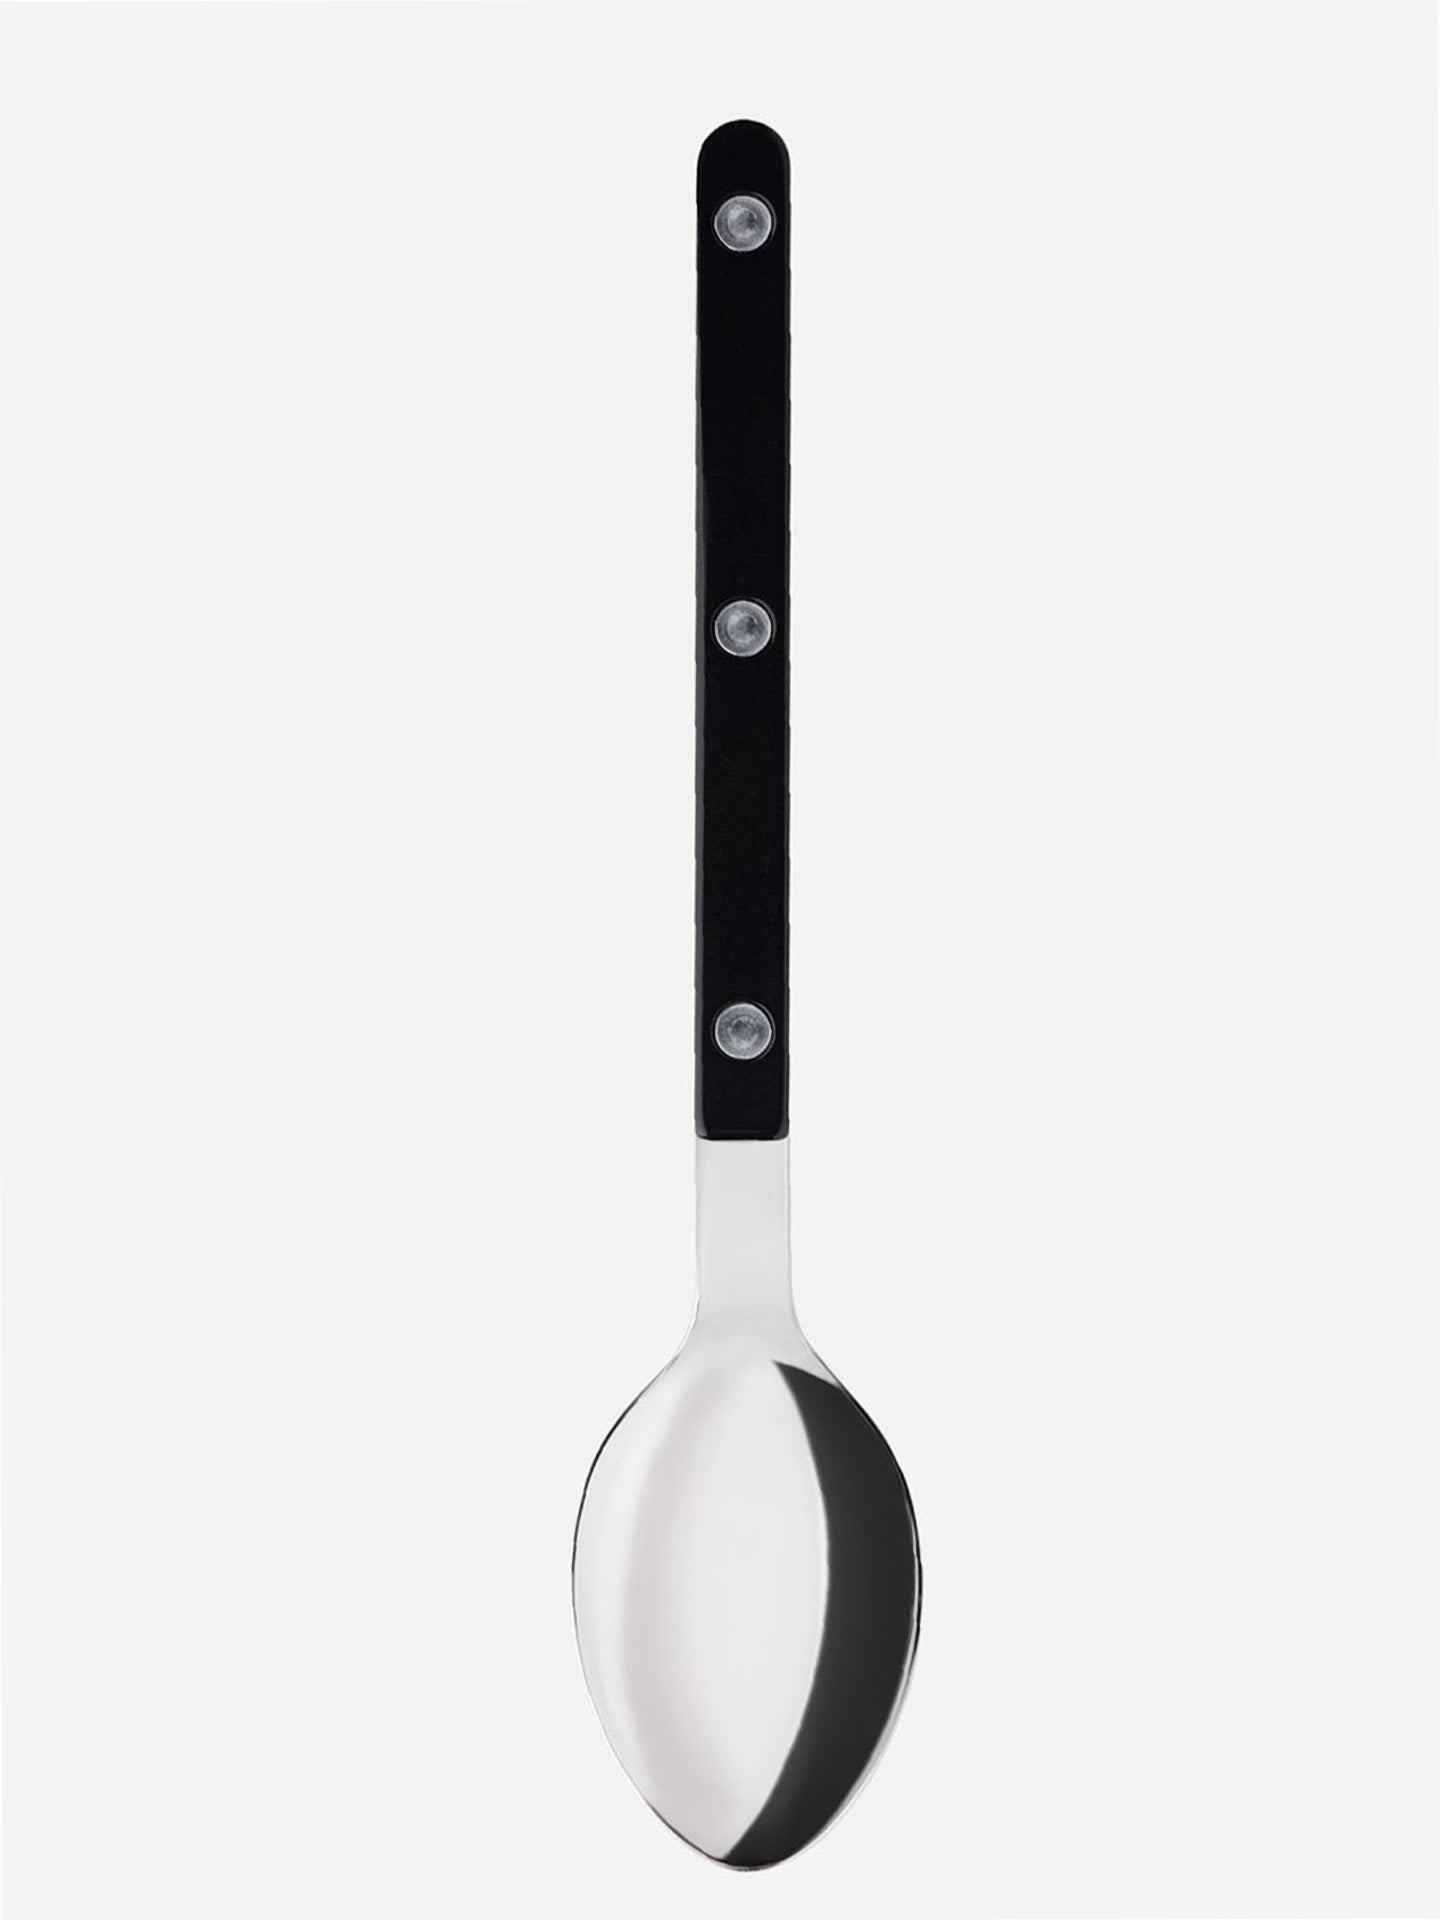 This dessert spoon from the Bistrot series by Sabre Paris is made from shiny stainless steel. The spoon is 19 cm, the black handle is acrylic with metal rivets. It's easy to clean in the dishwasher!